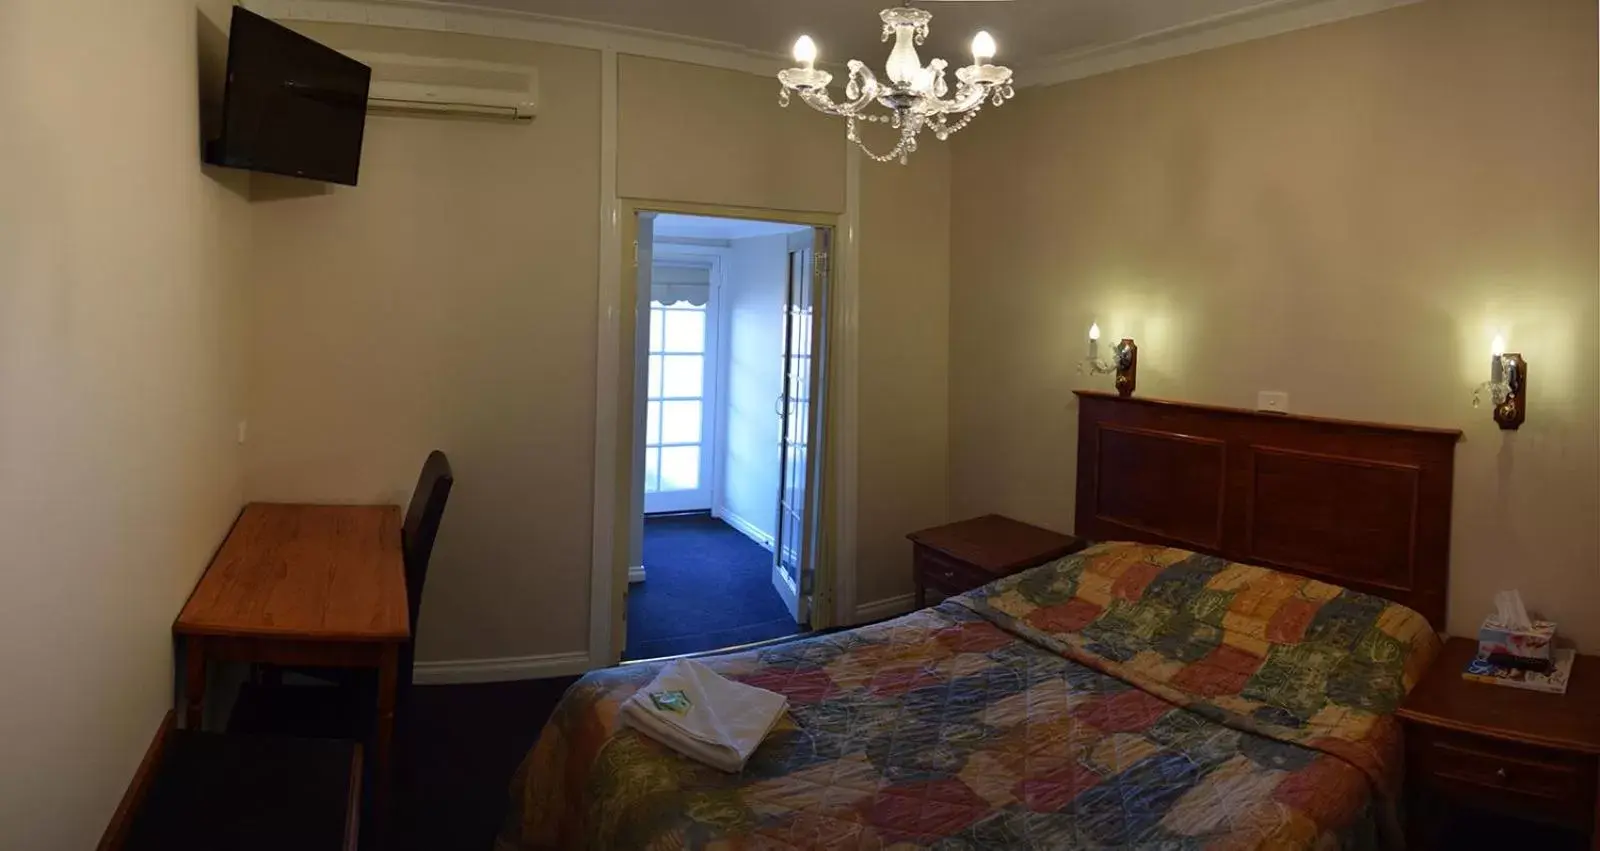 King Room with Balcony in The Palace Hotel Kalgoorlie